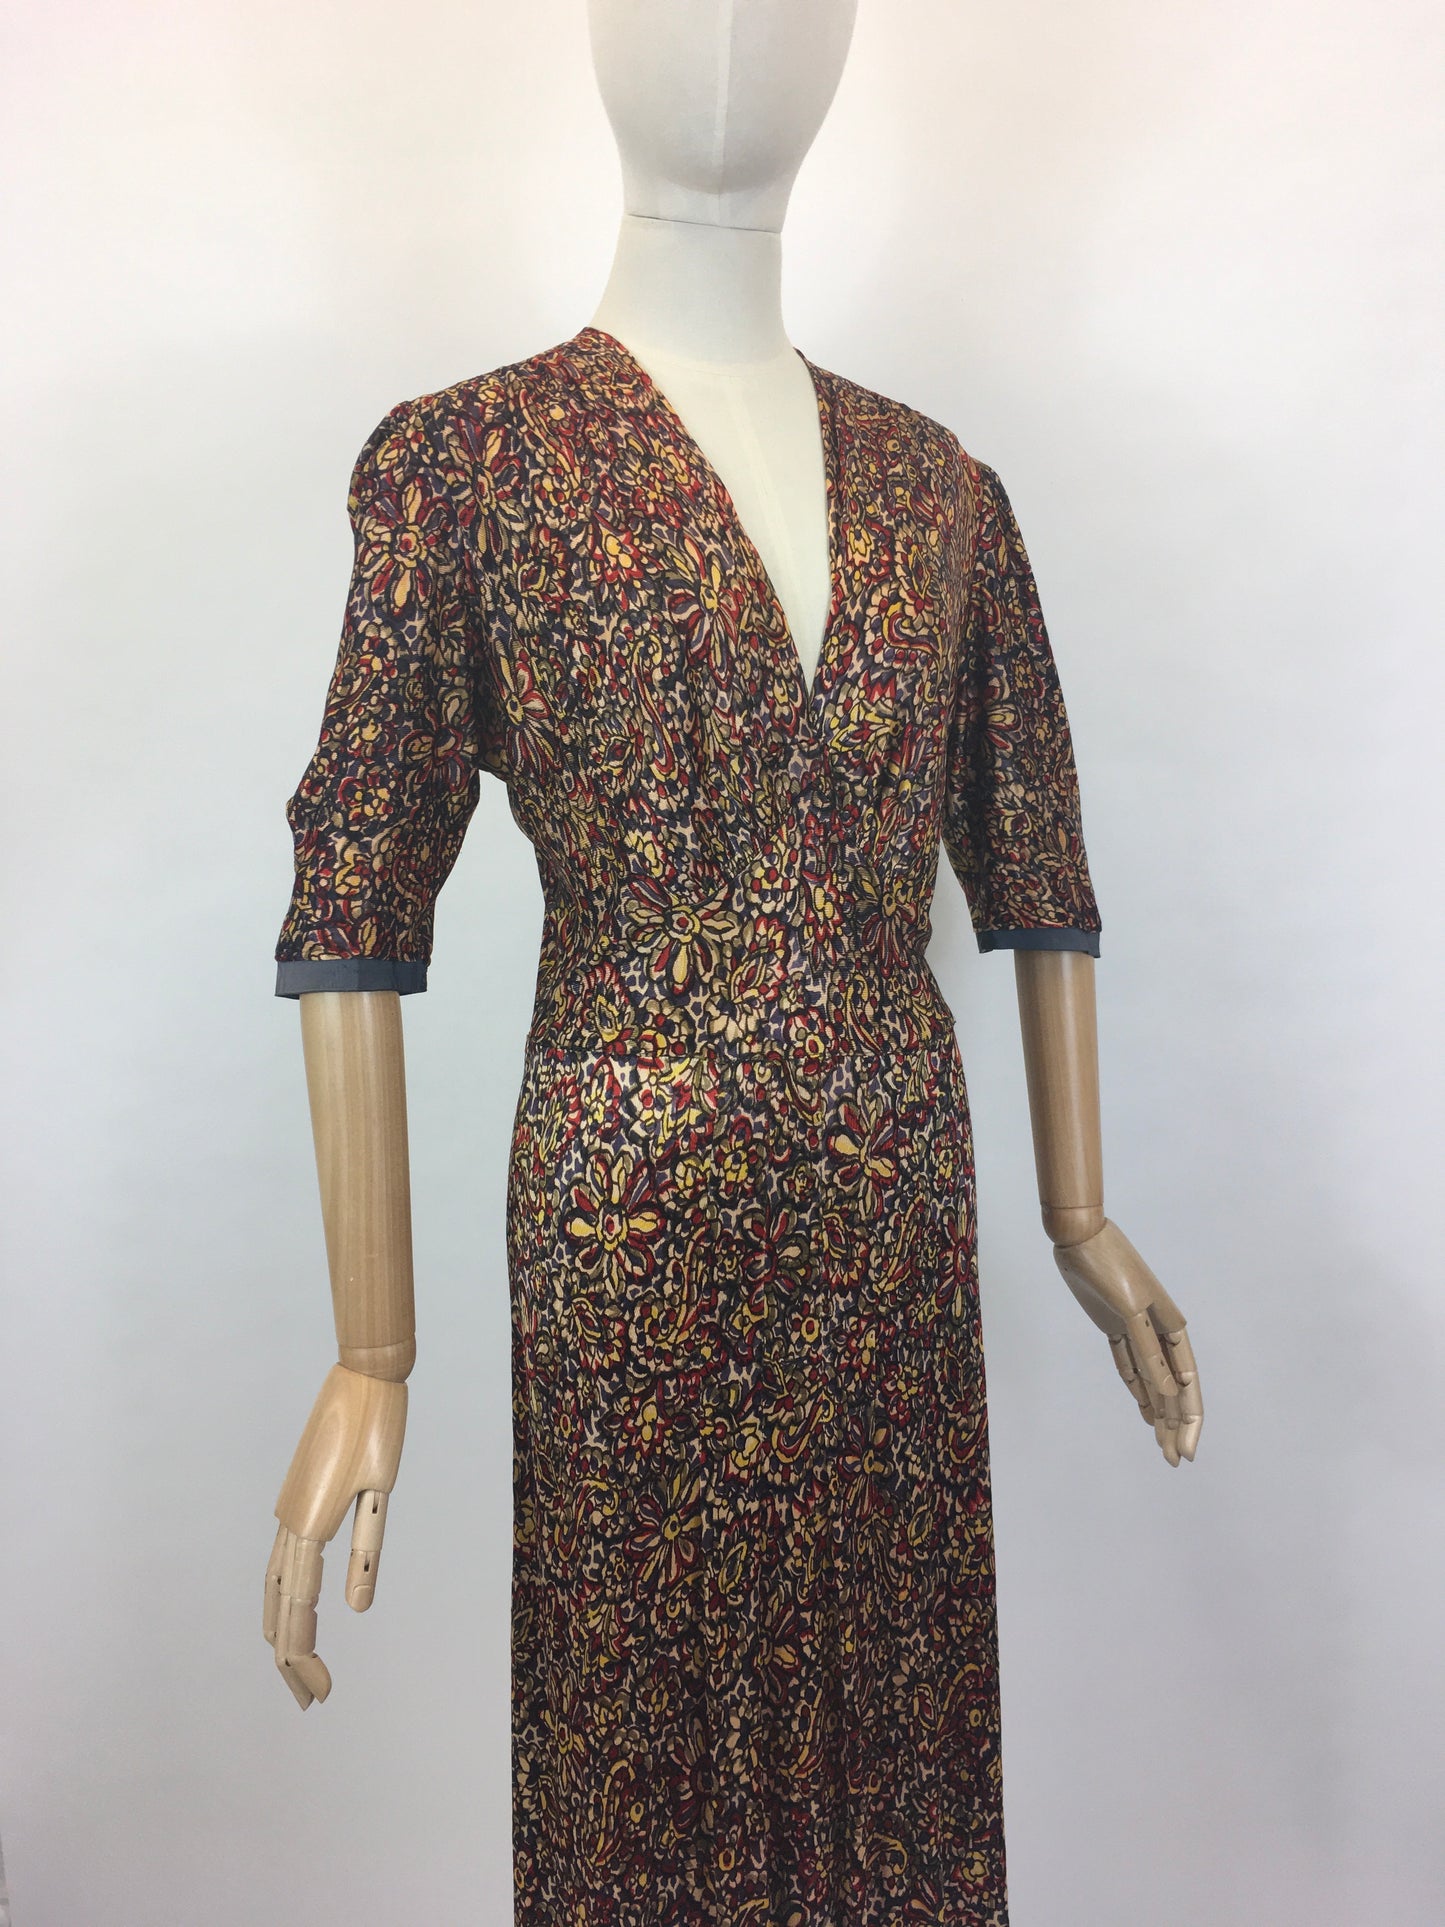 Original 1940’s STUNNING Rayon Jersey Dress AS IS - In Reds, Purples, Yellows & Navy